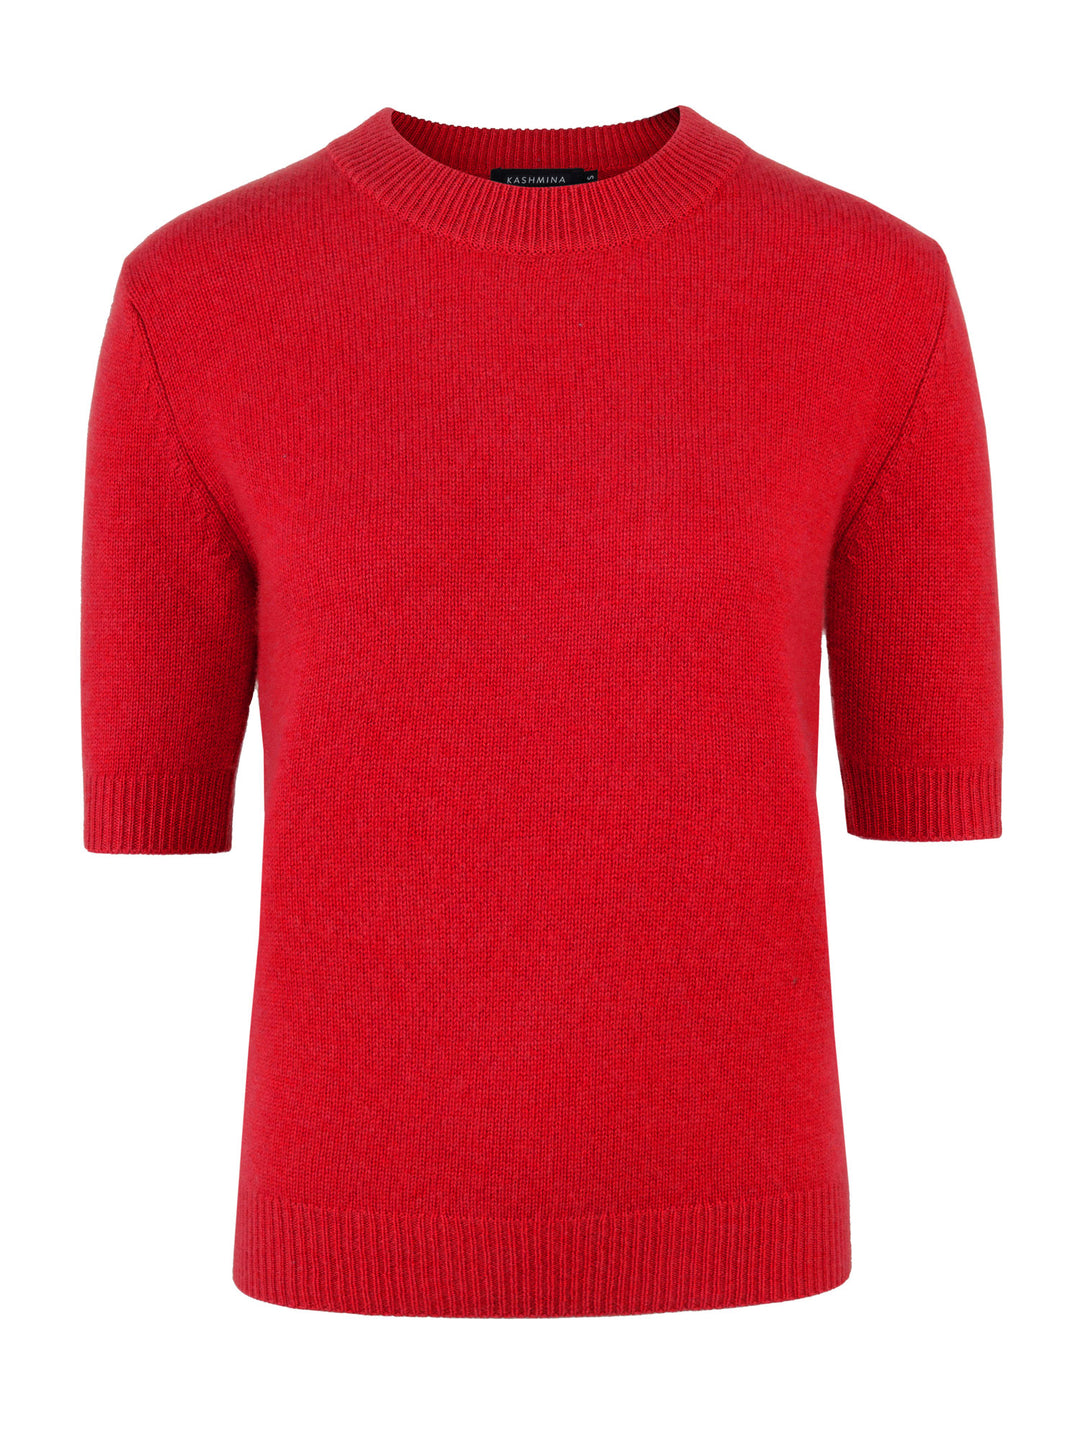 Short sleeved cashmere sweater, red, from Kashmina, 100% pure cashmere, natural